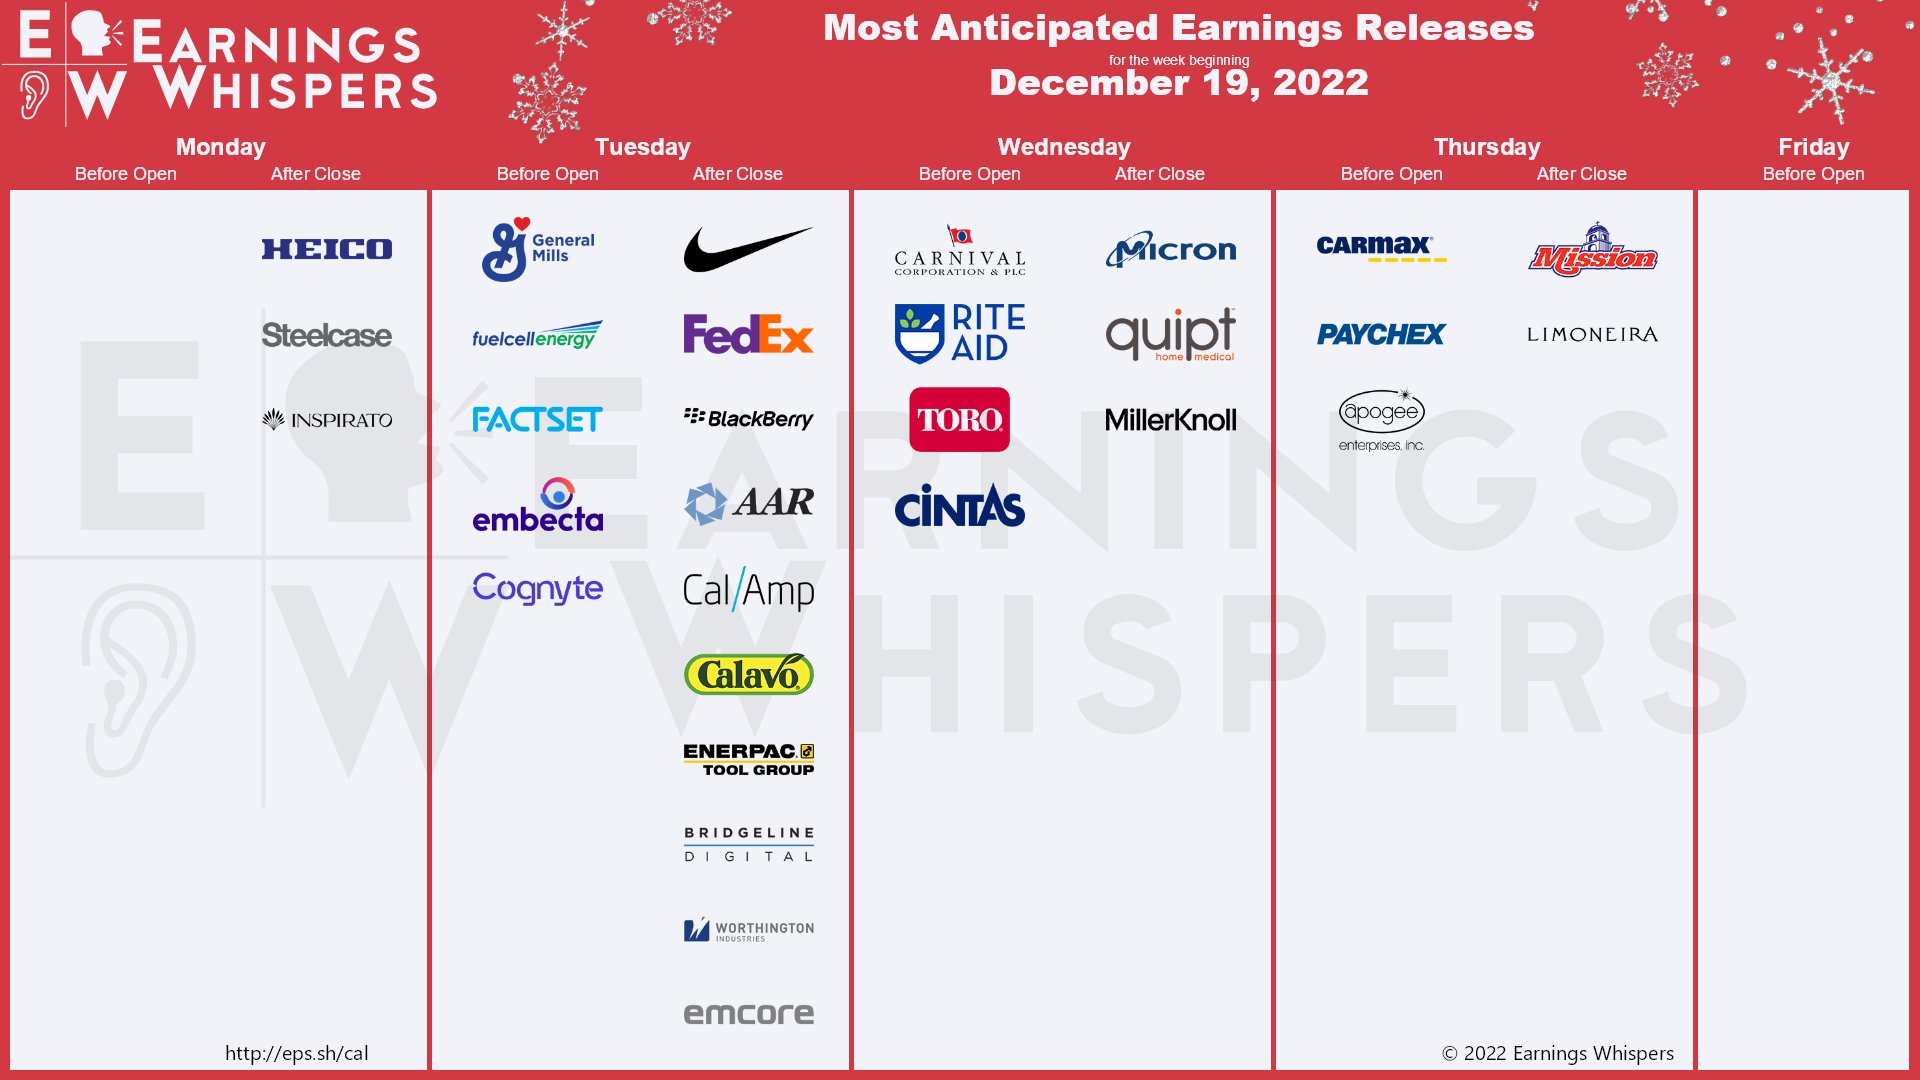 The most anticipated earnings releases for the week are Nike #NKE, FedEx #FDX, General Mills #GIS, Carnival #CCL, Micron Technology #MU, Rite Aid #RAD, FuelCell Energy #FCEL, CarMax #KMX, FactSet #FDS, and The Toro Company #TTC. 